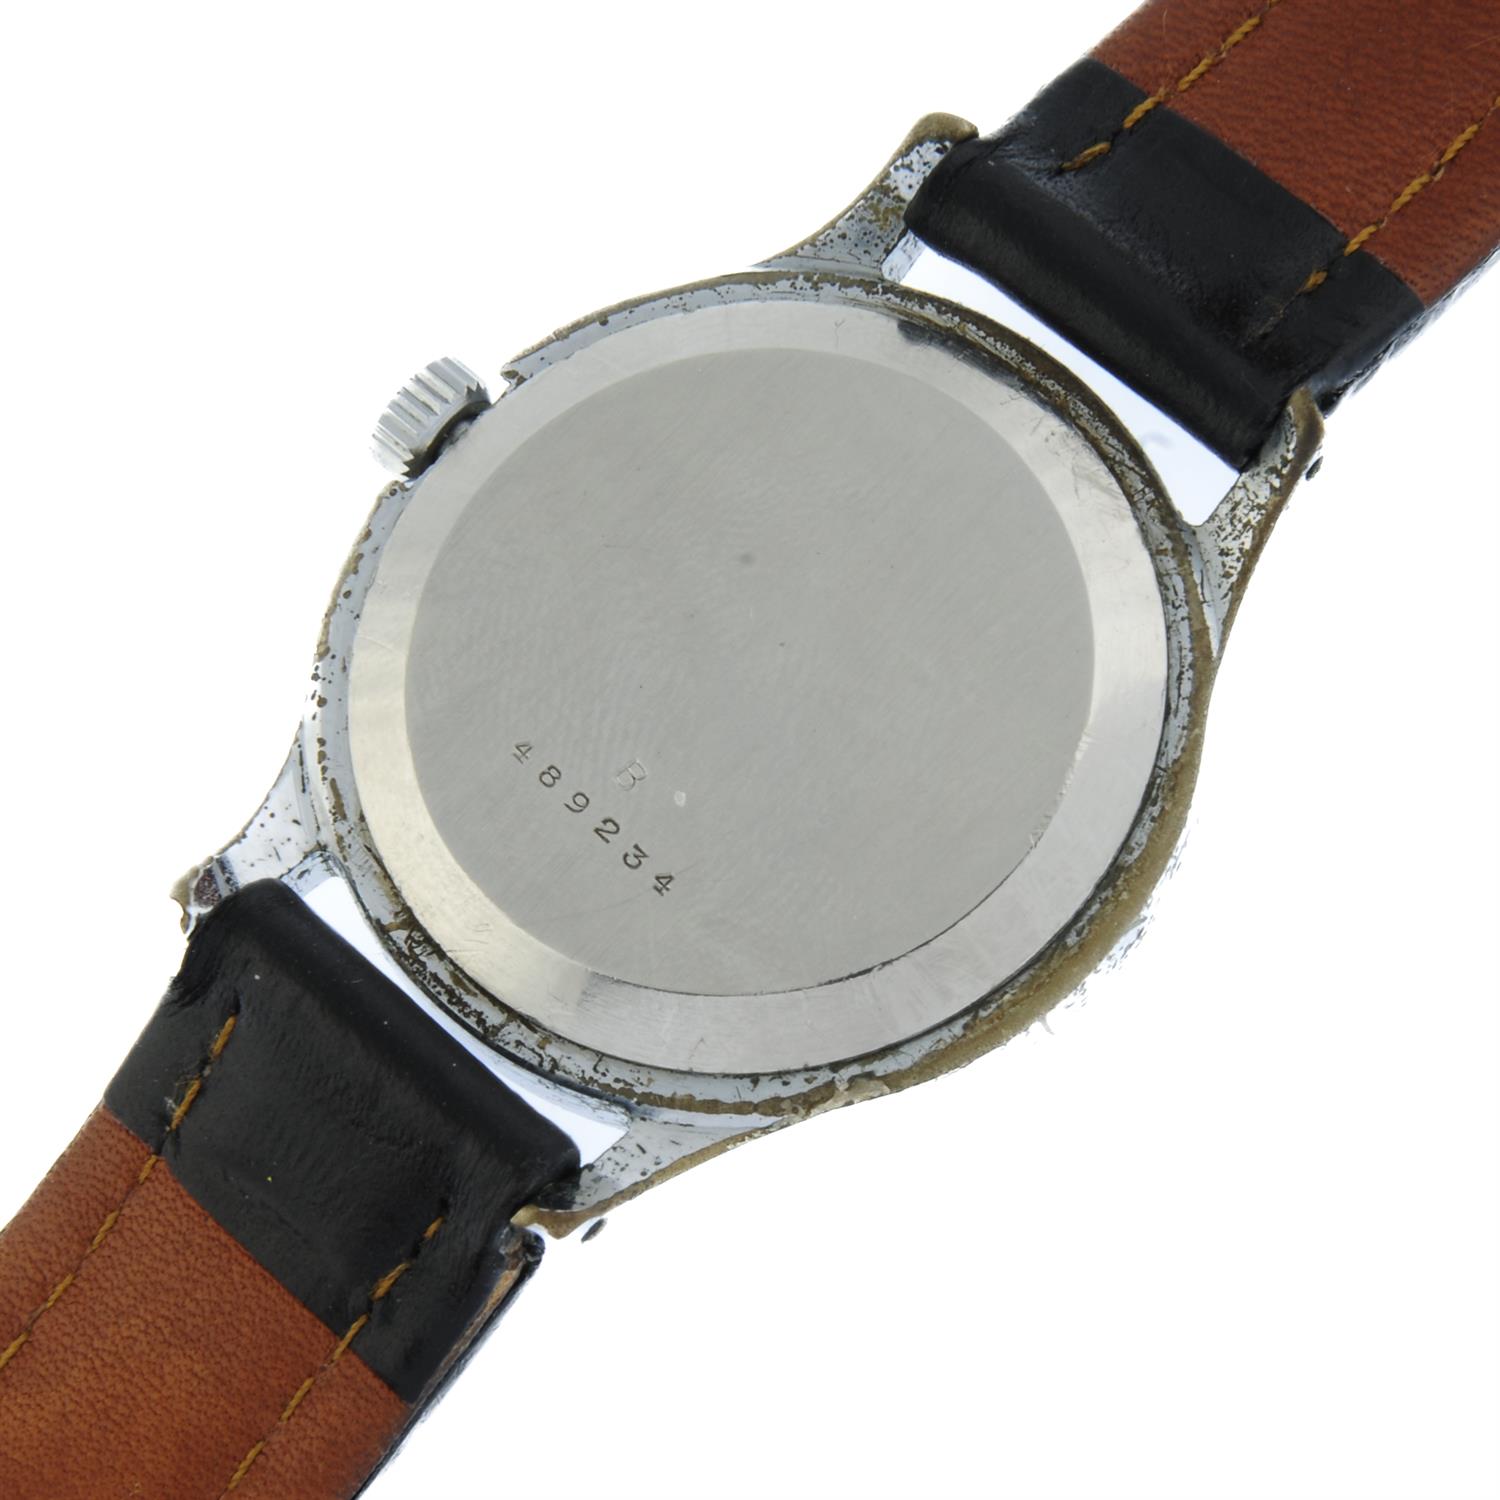 Jaeger-LeCoultre - a watch, 33mm. - Image 3 of 3